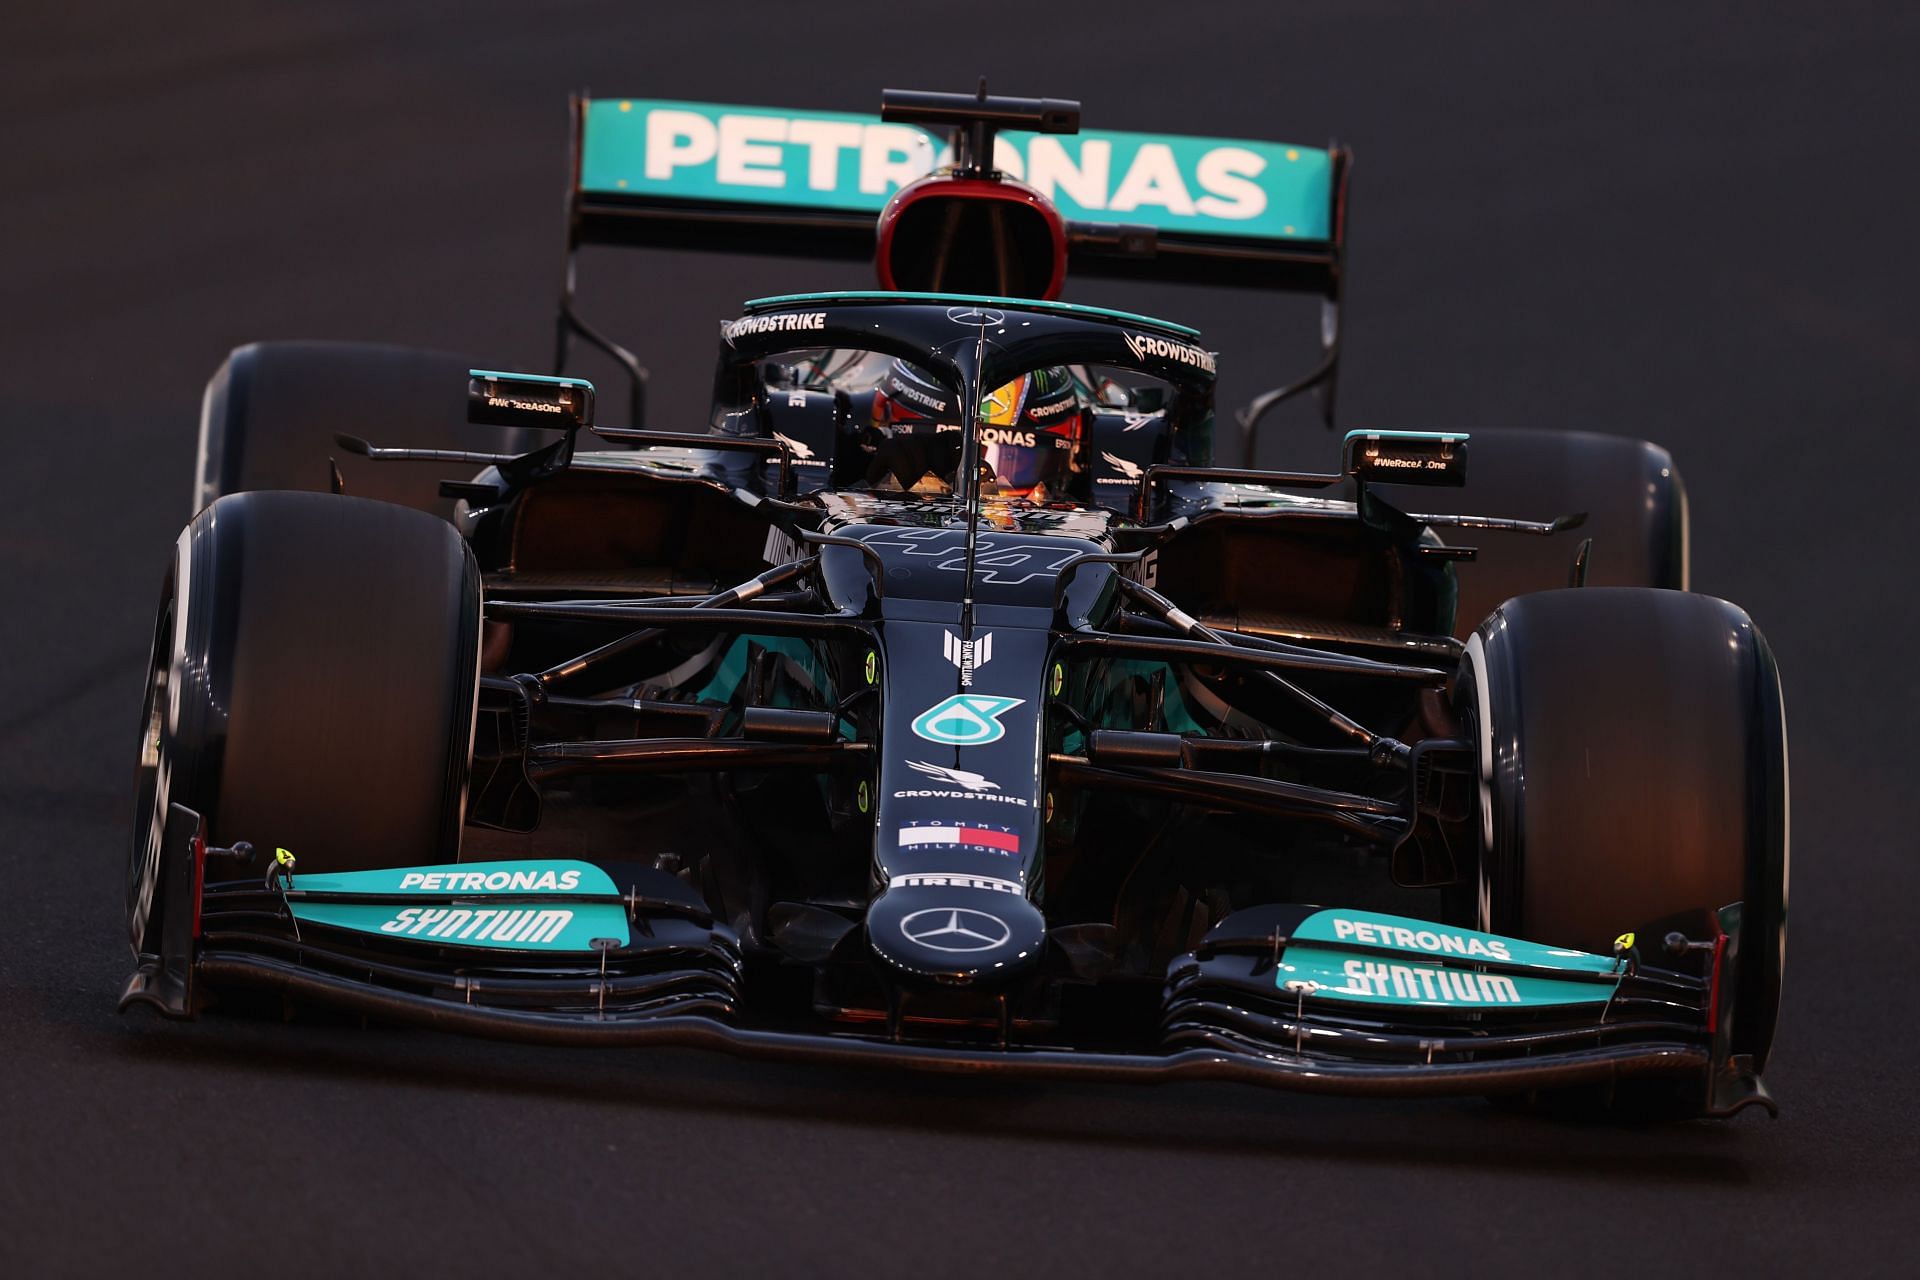 F1 Grand Prix of Saudi Arabia - Lewis Hamilton managed to get P2 at the end of FP3.